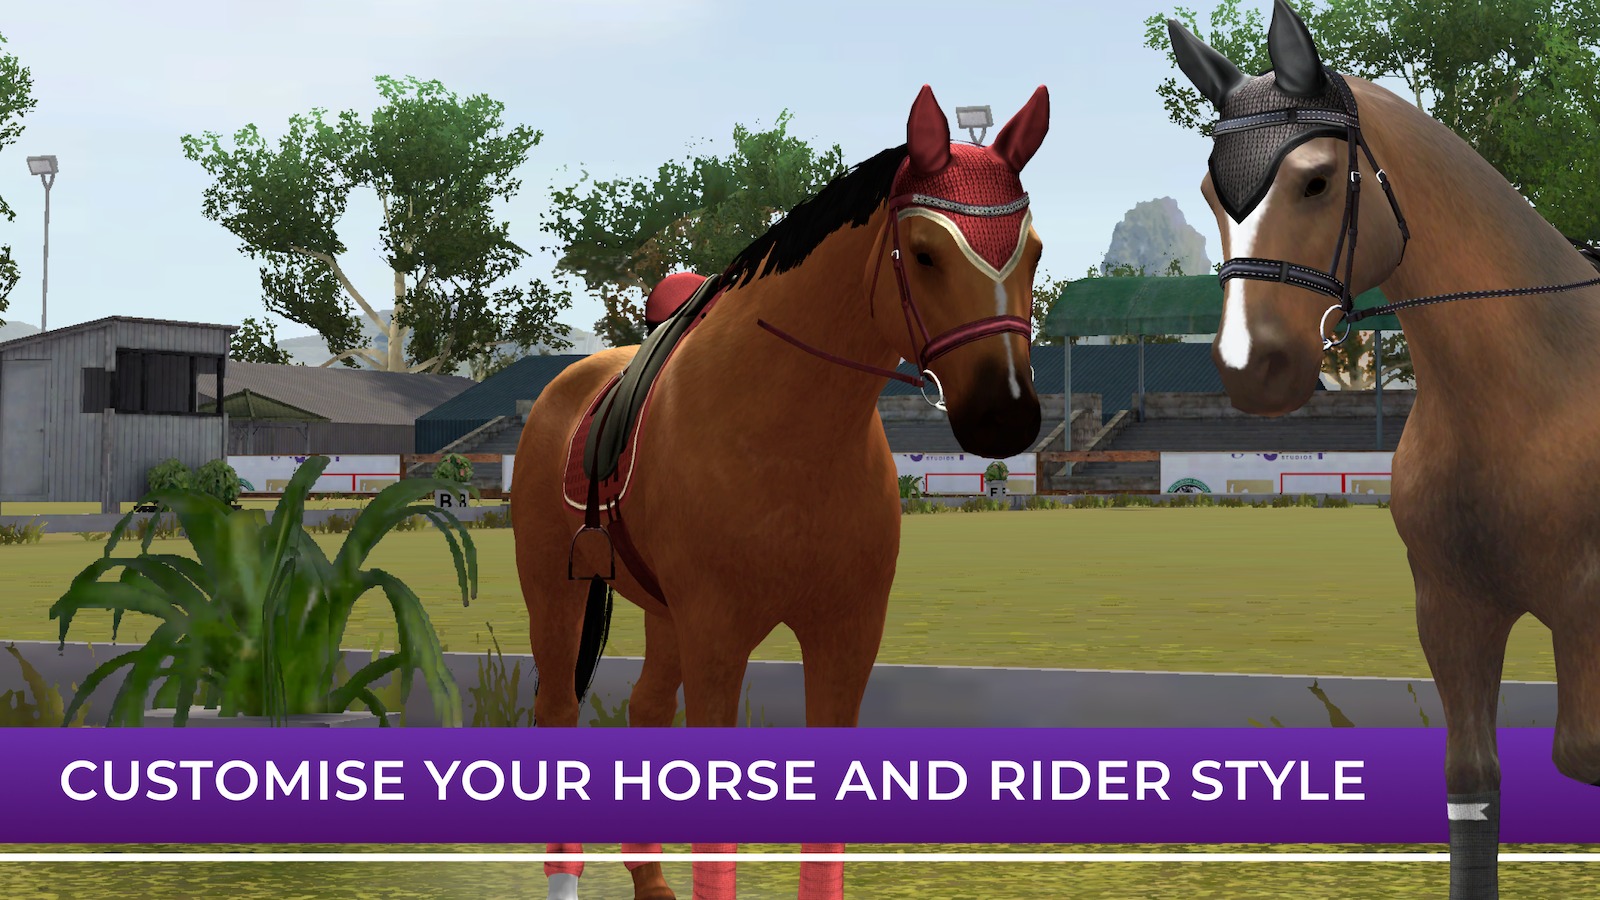 Customize your horse and rider style in GoGallop